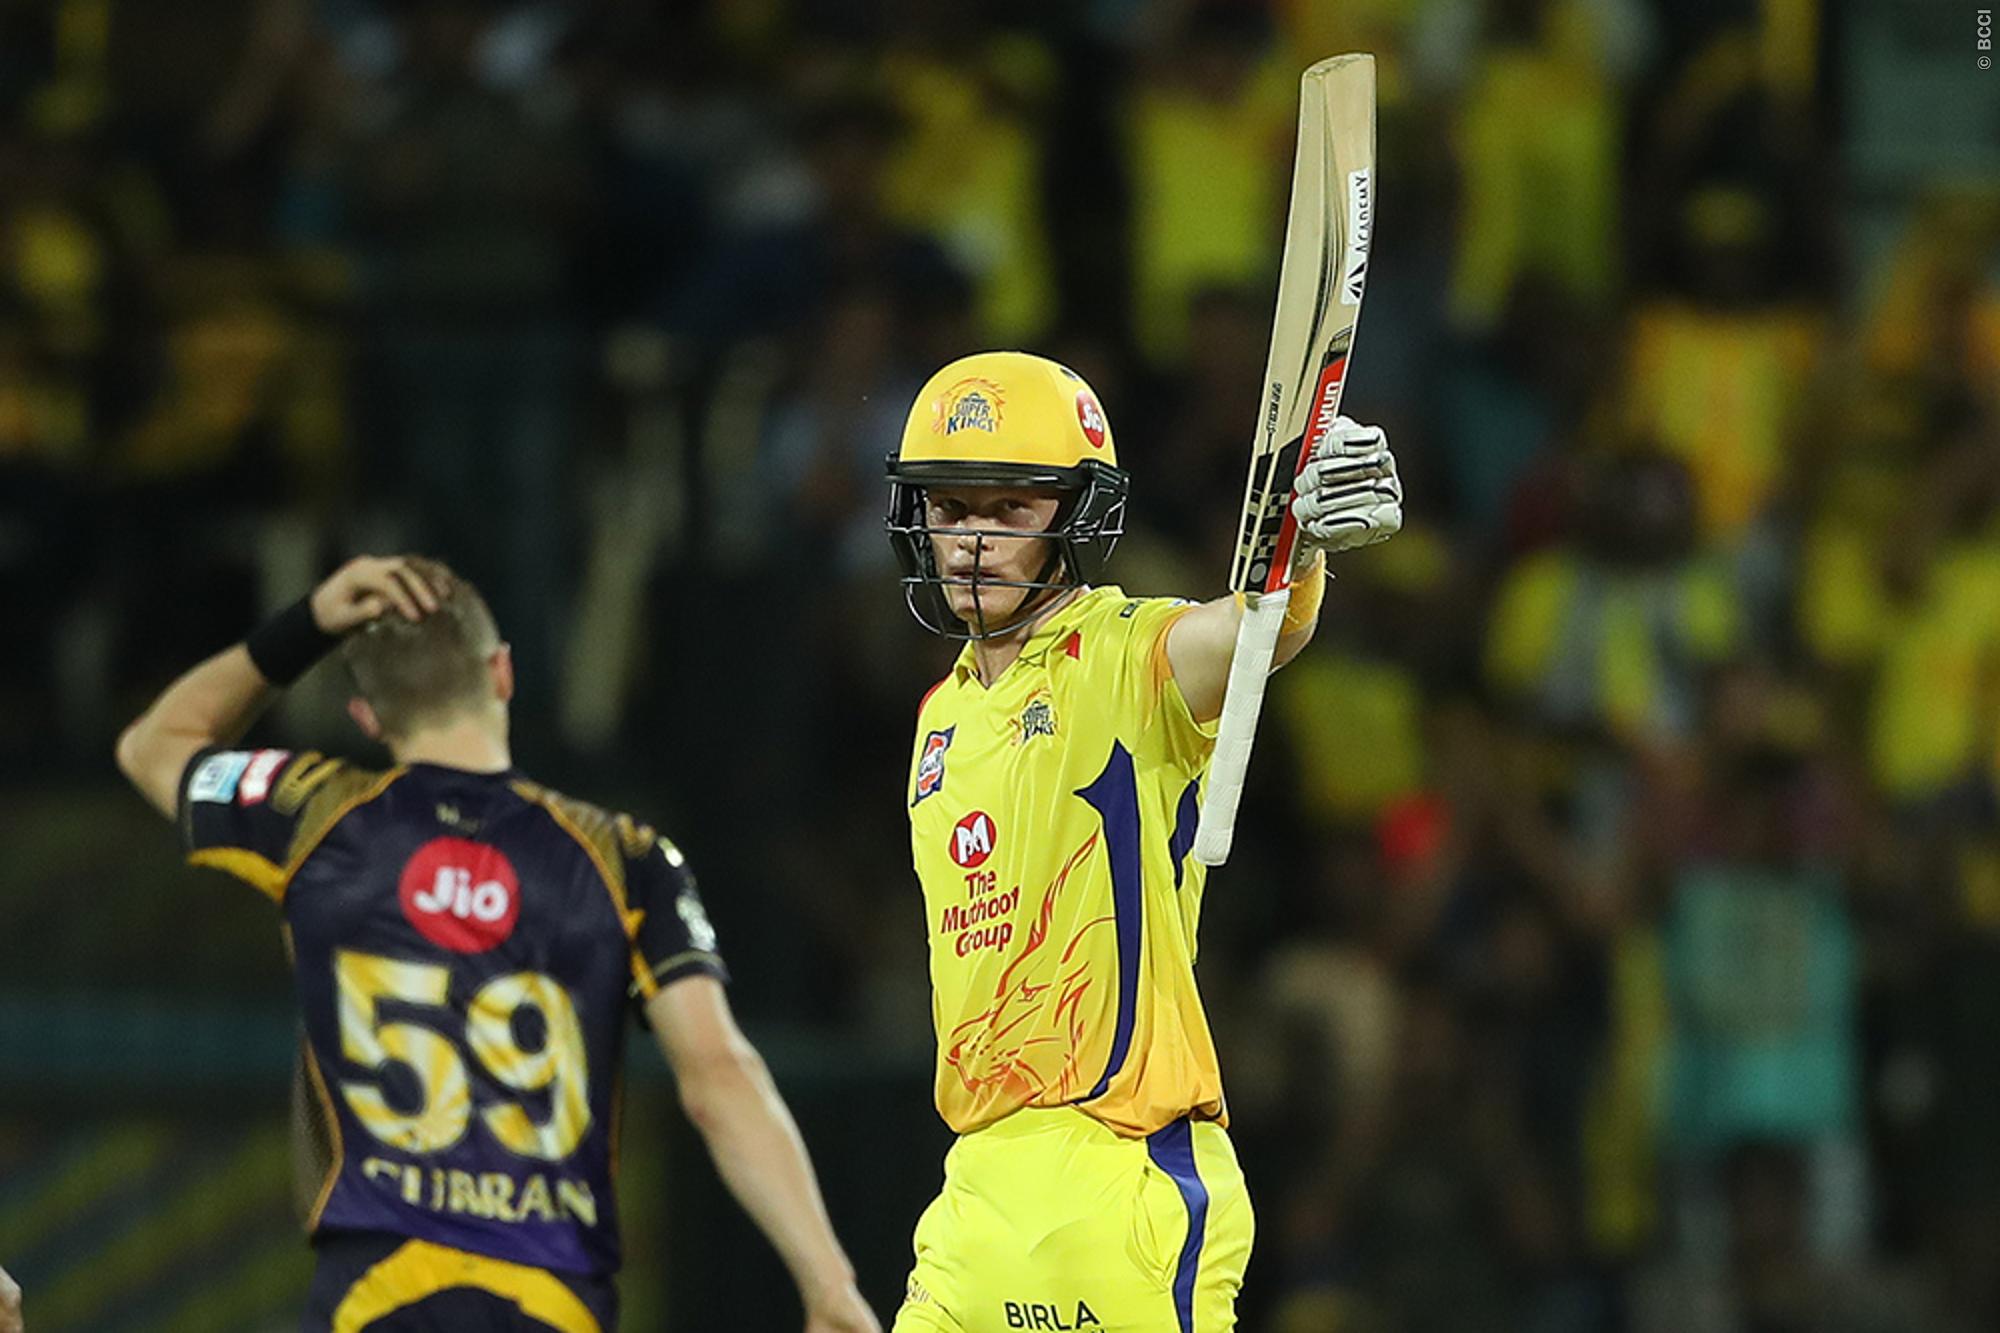 IPL 2018 | Billings the Hero as CSK snatch victory on their return to Chennai